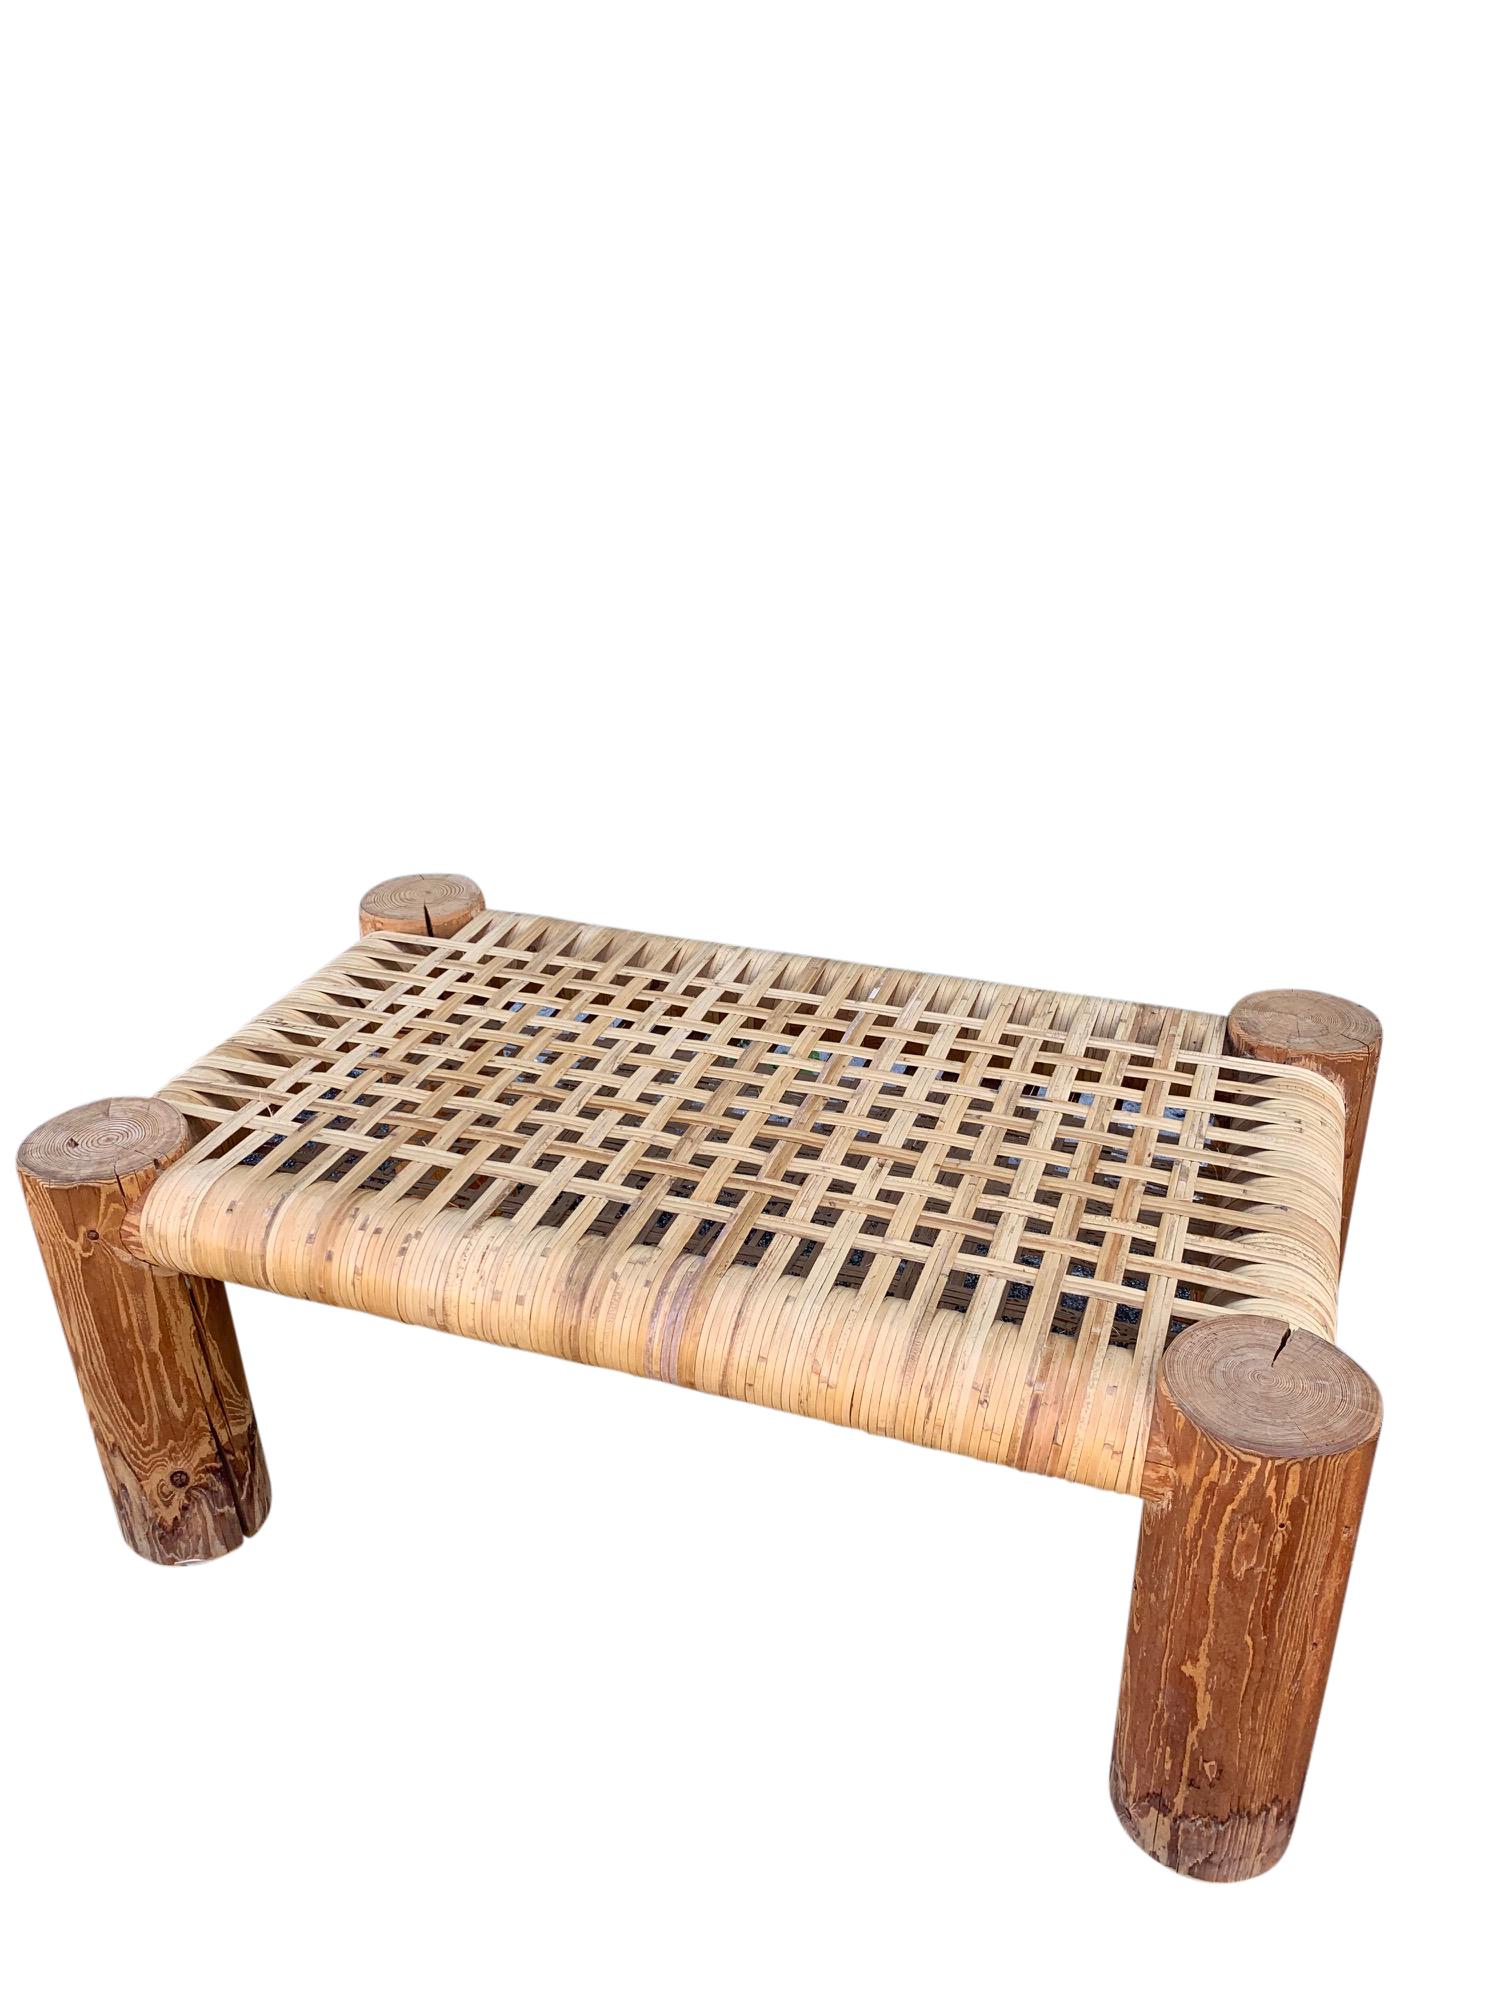 20th Century Cane Wicker Wrapped Modern Rustic Wood Bench Table For Sale